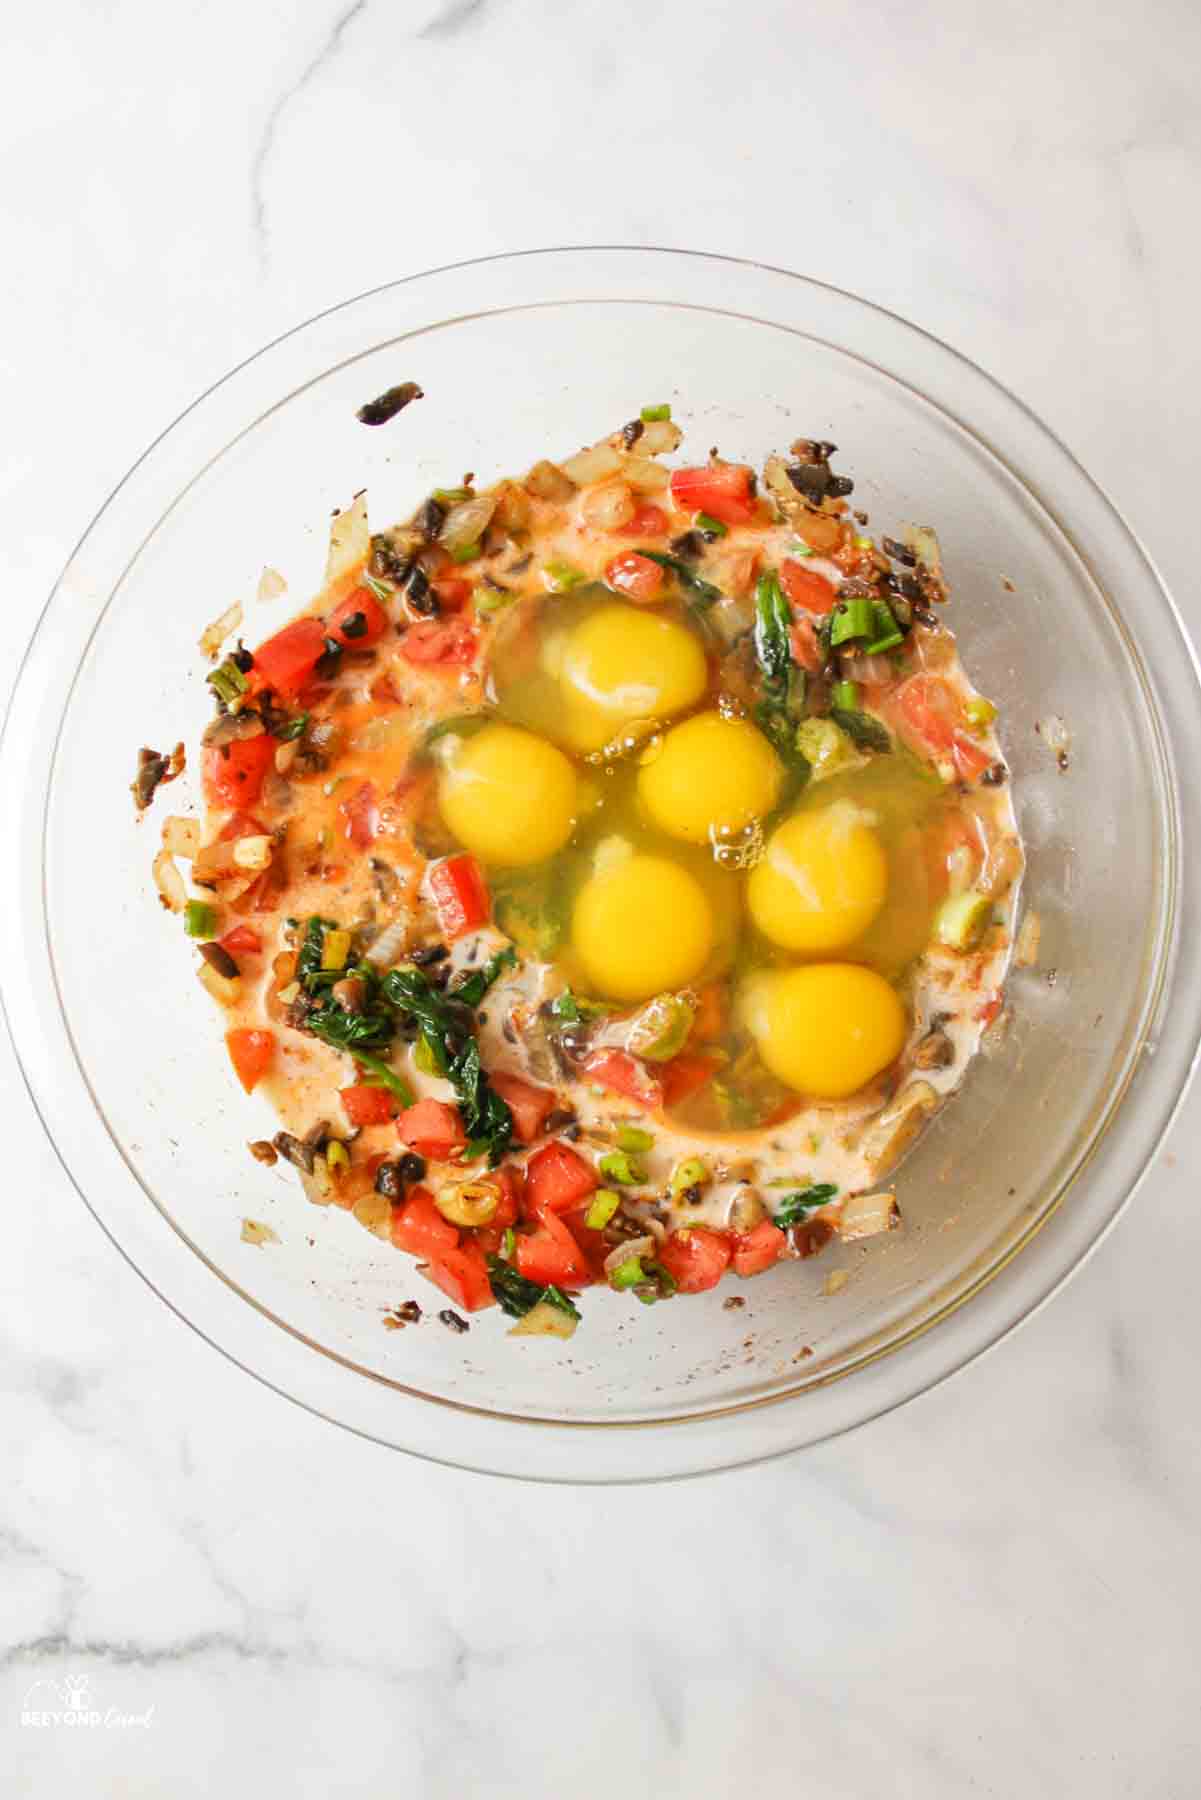 eggs and milk added to veggies in a bowl.